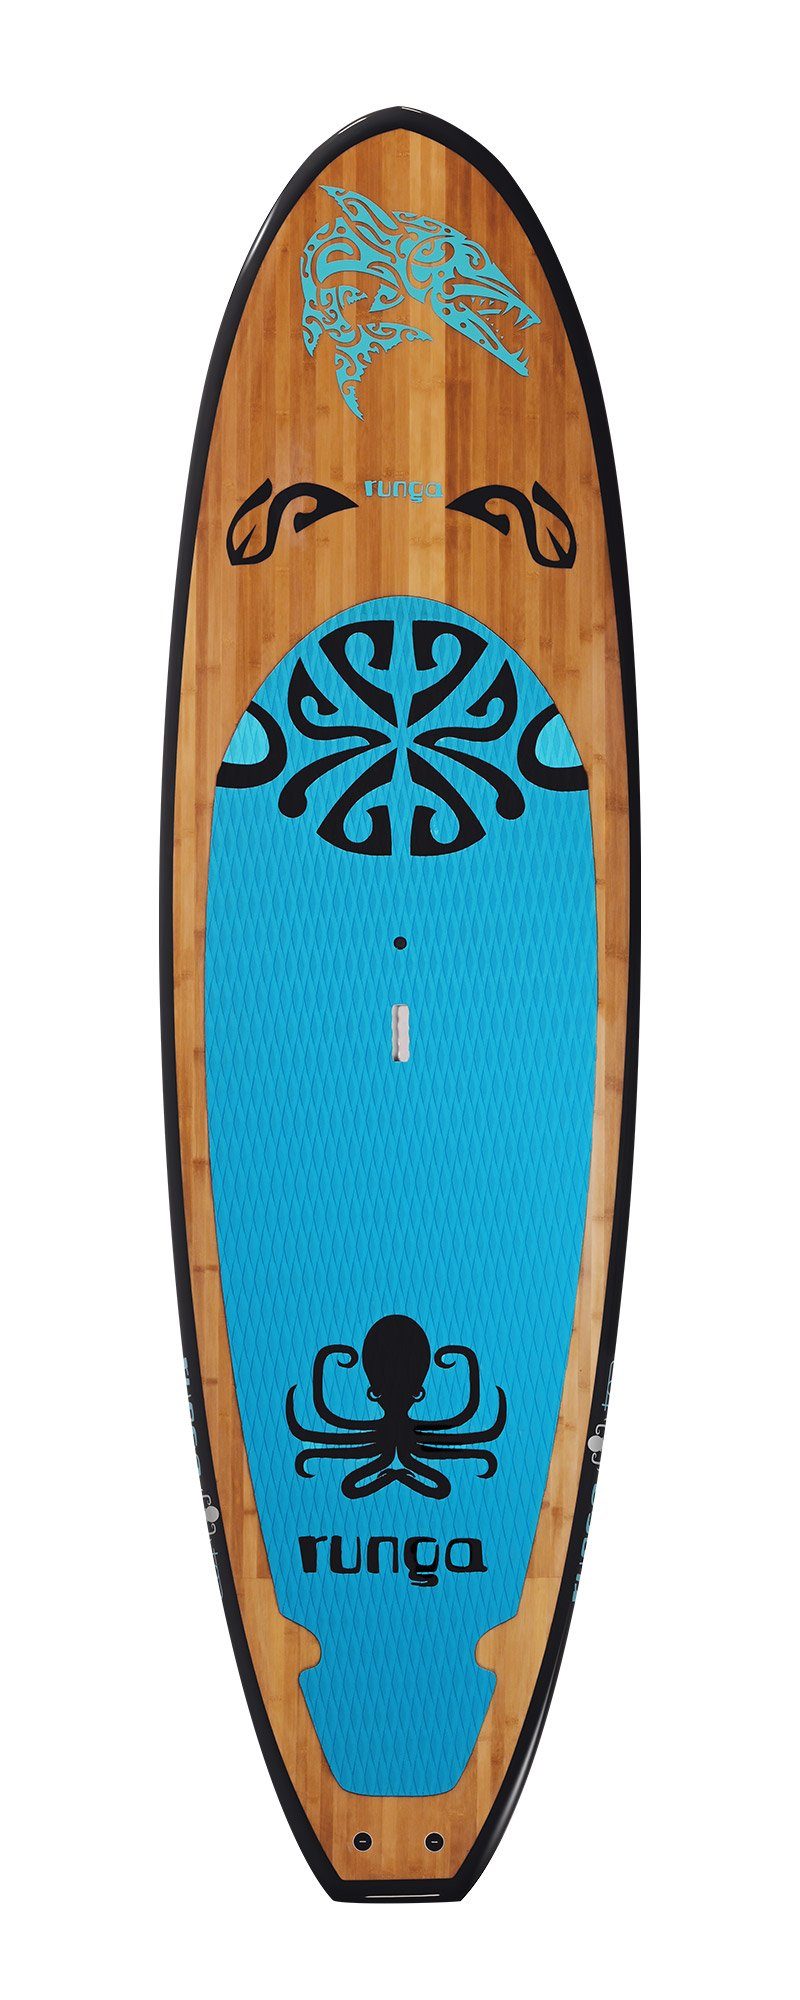 Runga Runga-Boards Up (Set TOA BAMBOO Allround, 9.5, Stand Inkl. leash SUP-Board 3-tlg. Paddling BLUE Finnen-Set) Board & Hard coiled SUP,